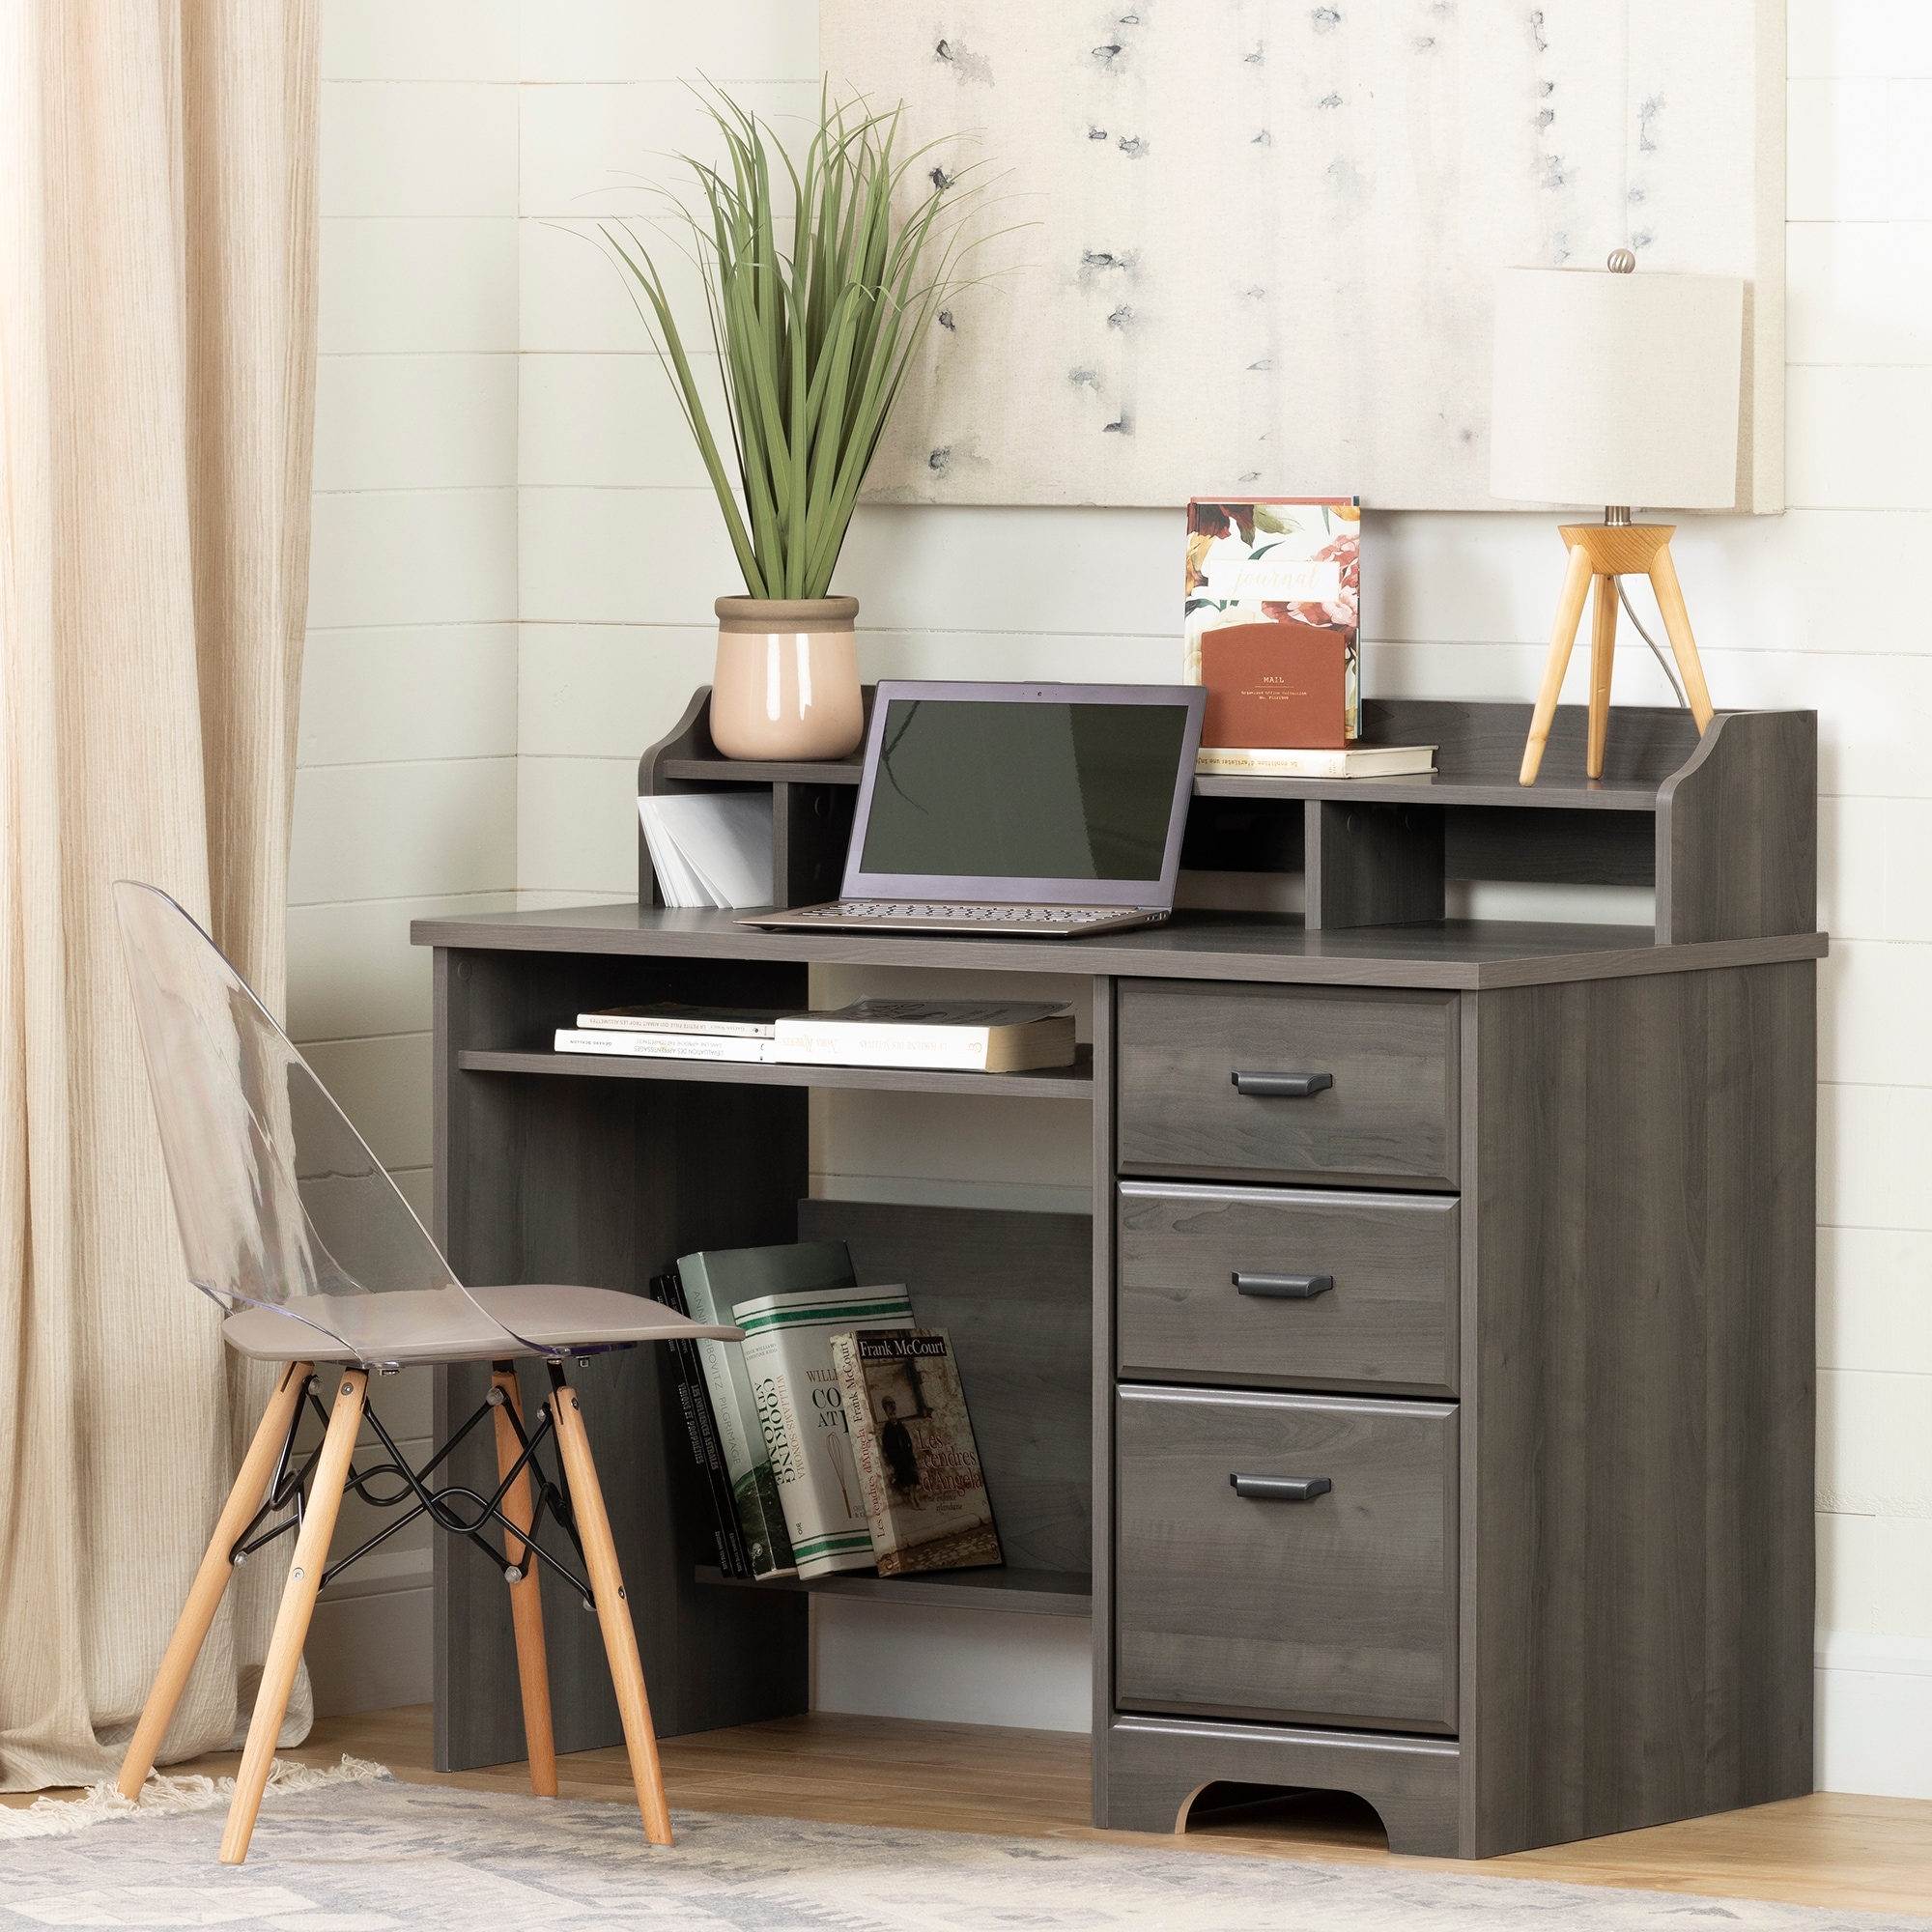 Versa Home Office Desk Country Cottage by South Shore - On Sale - Overstock  - 25321041